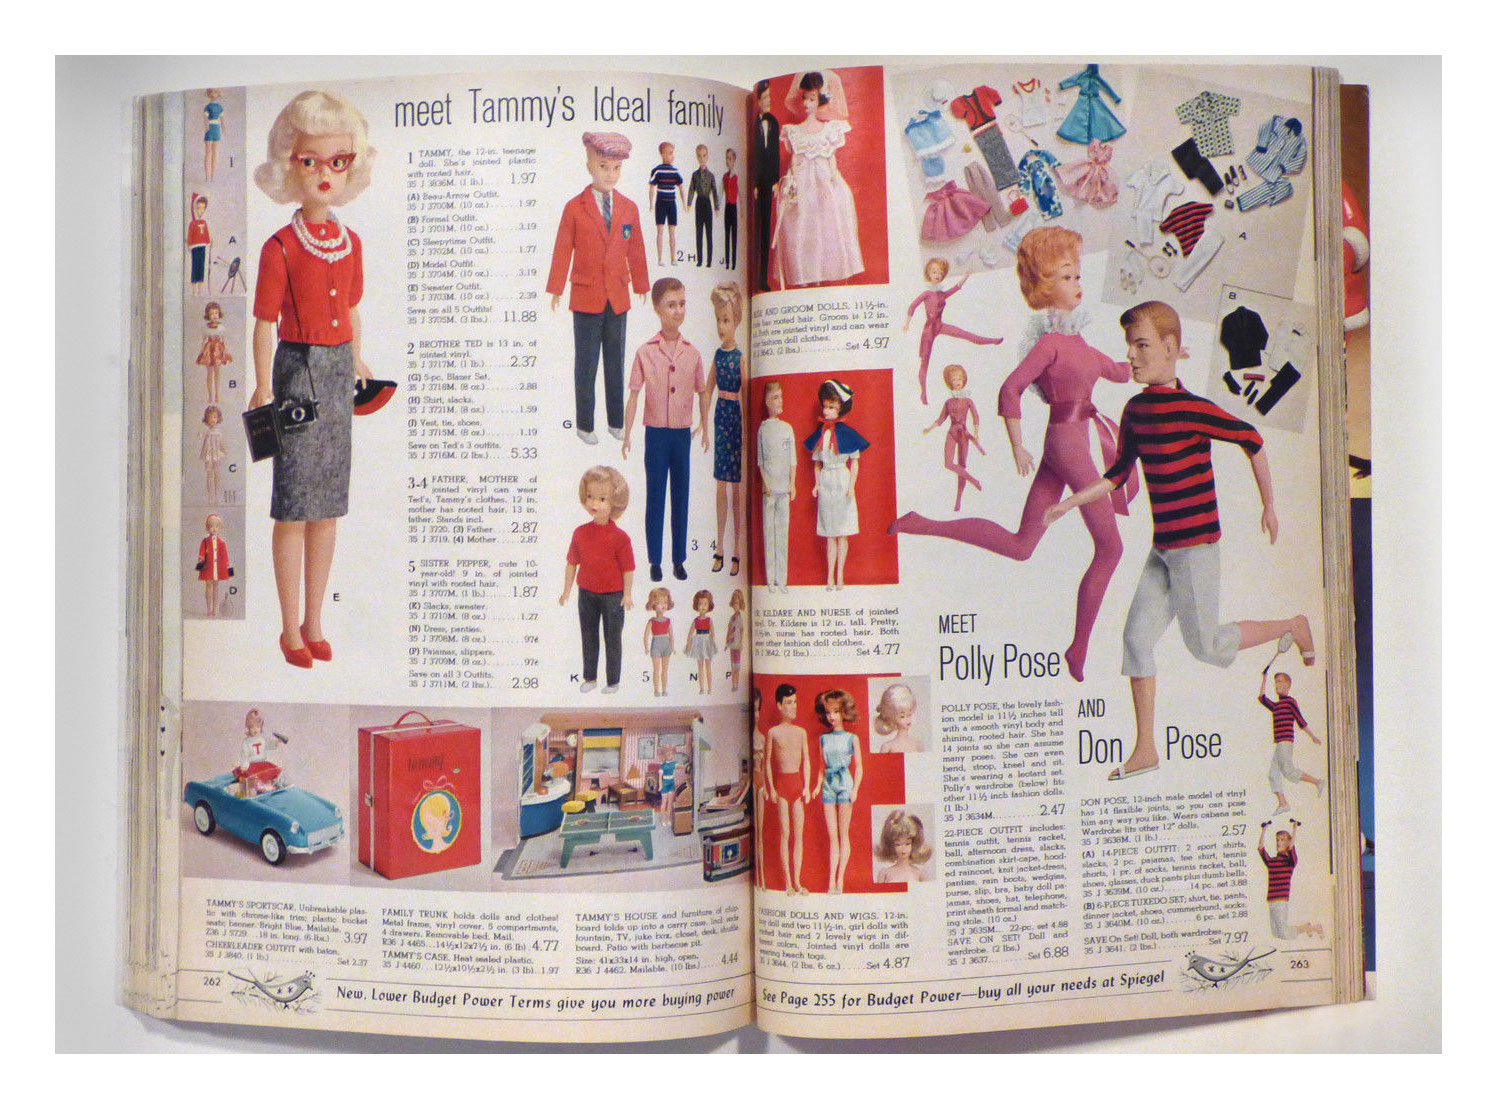 From 1963 Spiegel Christmas Book